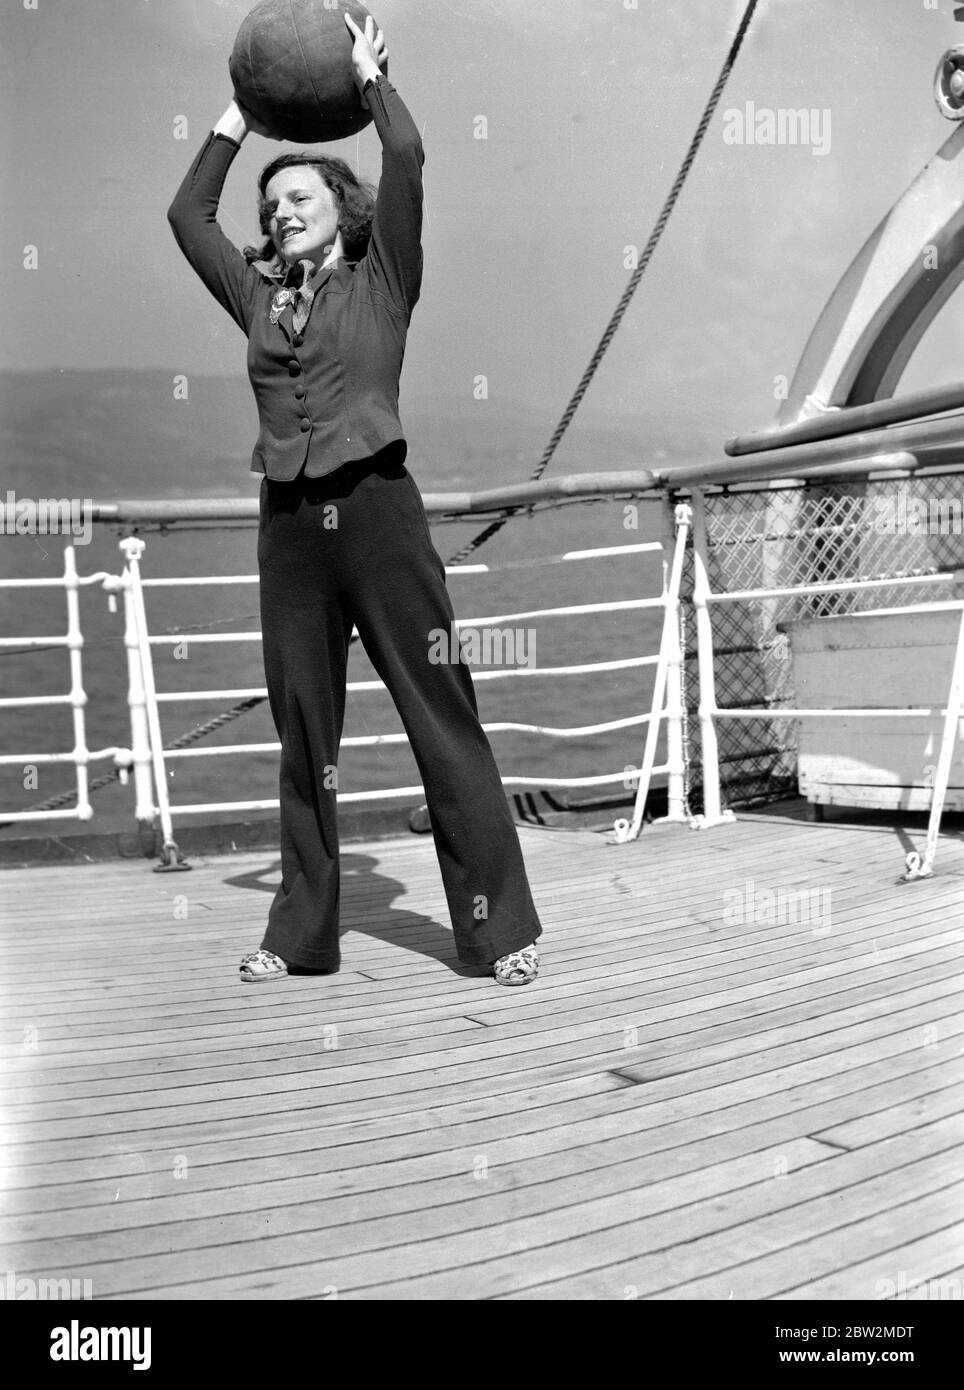 King George VI and Queen Elizabeth on Canada tour 1939 - Photo shows woman on deck doing keep fit with a ball Stock Photo